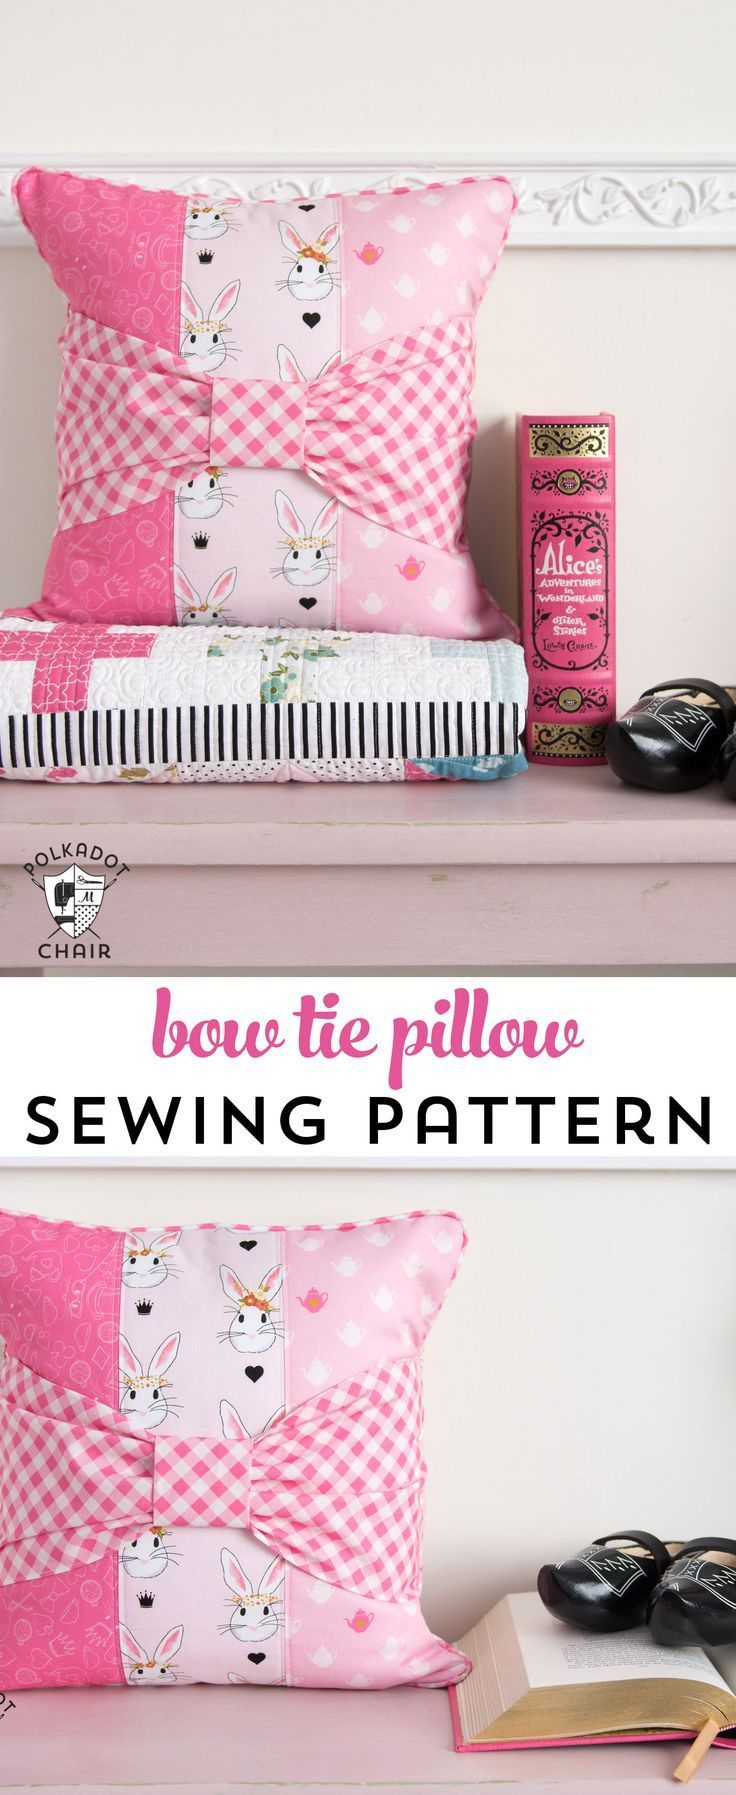 Pillow Sewing Patterns Bow Tie Pillow Sewing Pattern Inspiration Sewing Projects